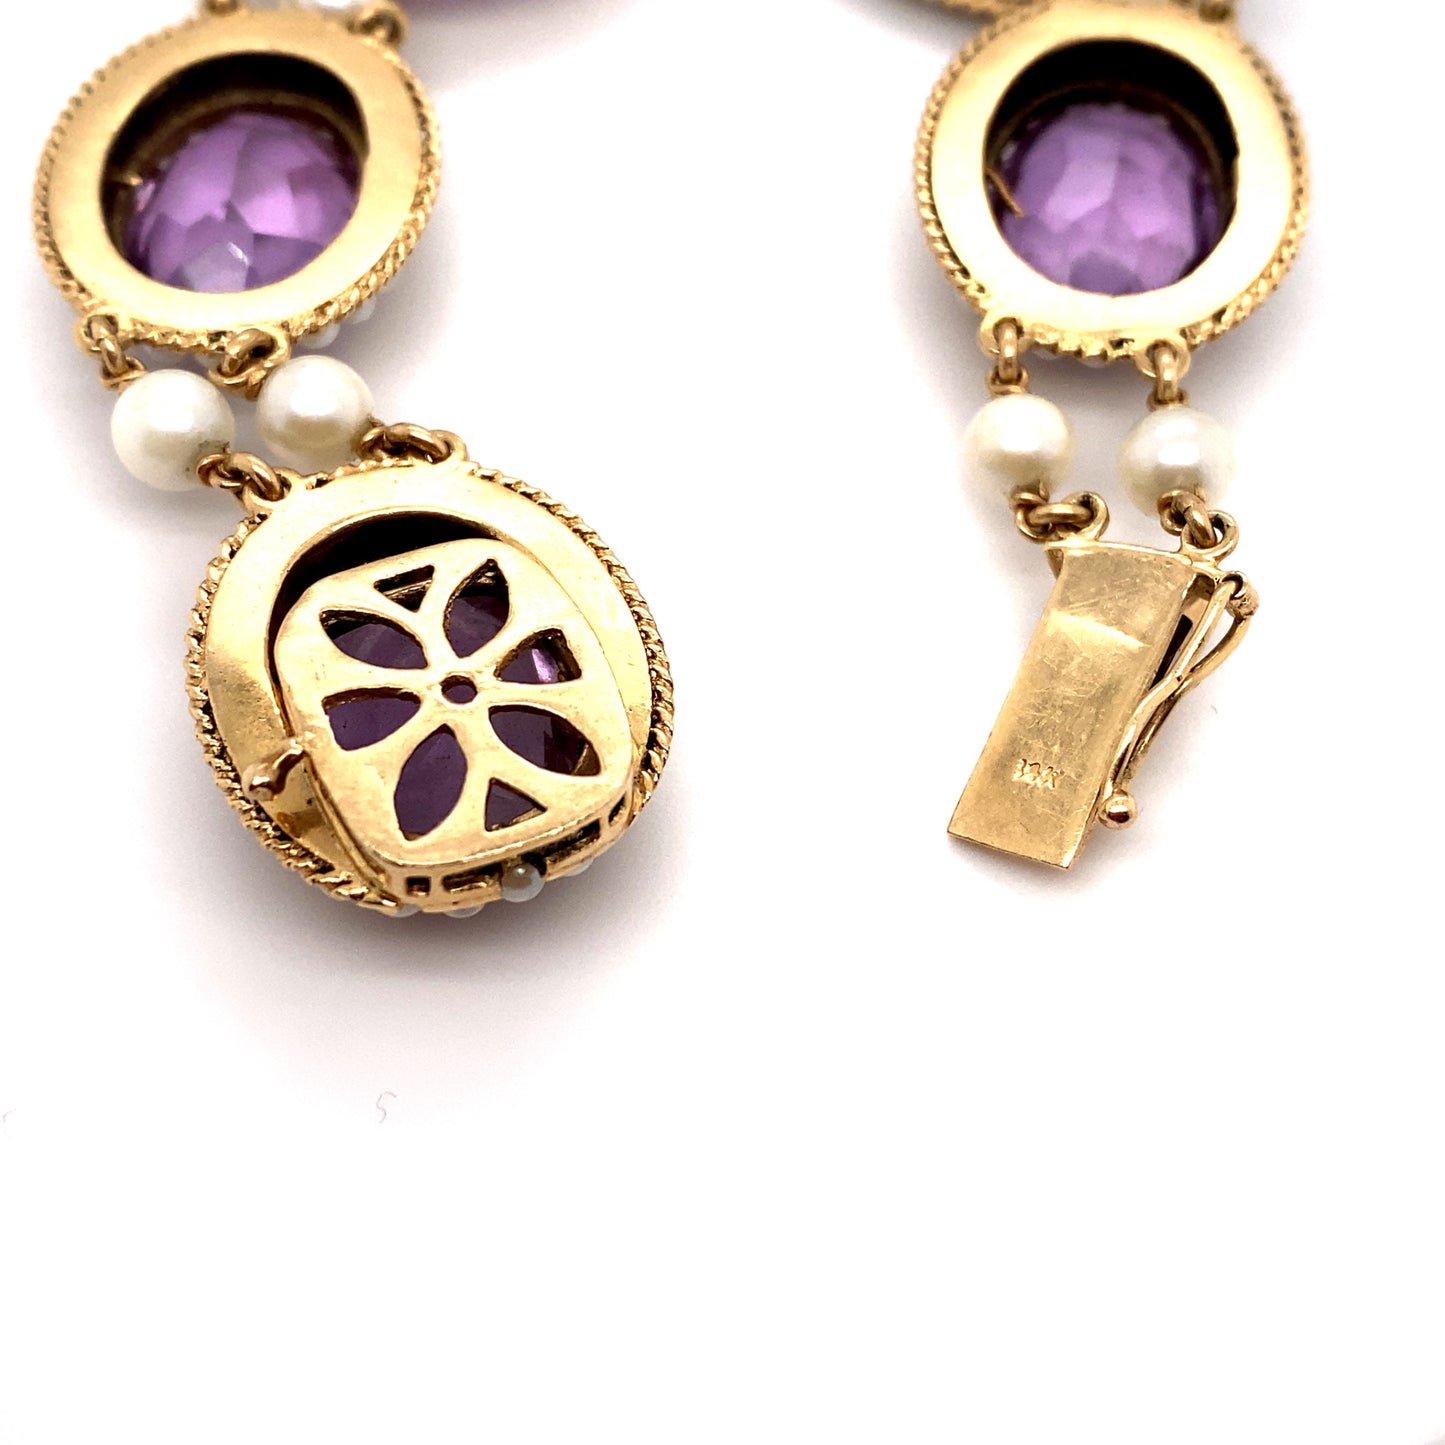 Circa 1950 Retro Amethyst and Pearl Halo Link Bracelet in 14K Gold